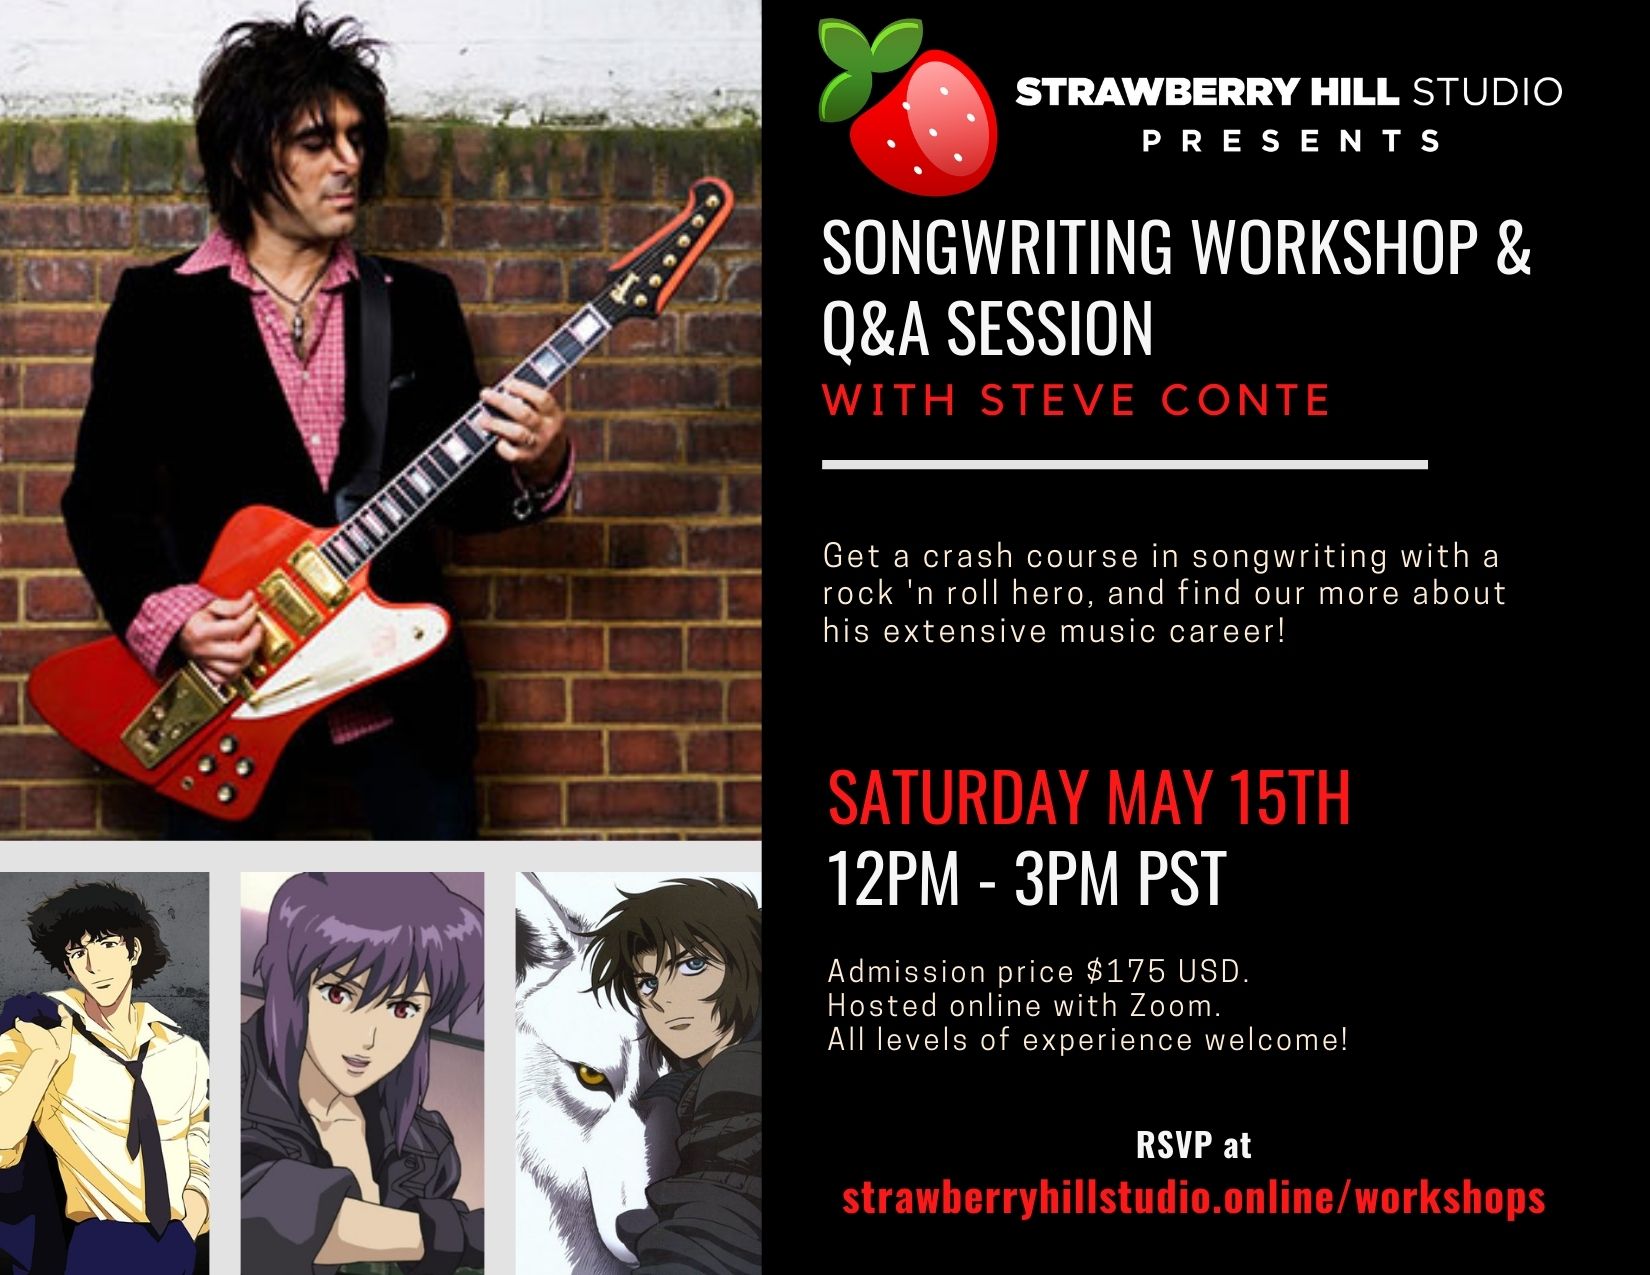 Songwriting Workshop & Q&A Session w/ Steve Conte